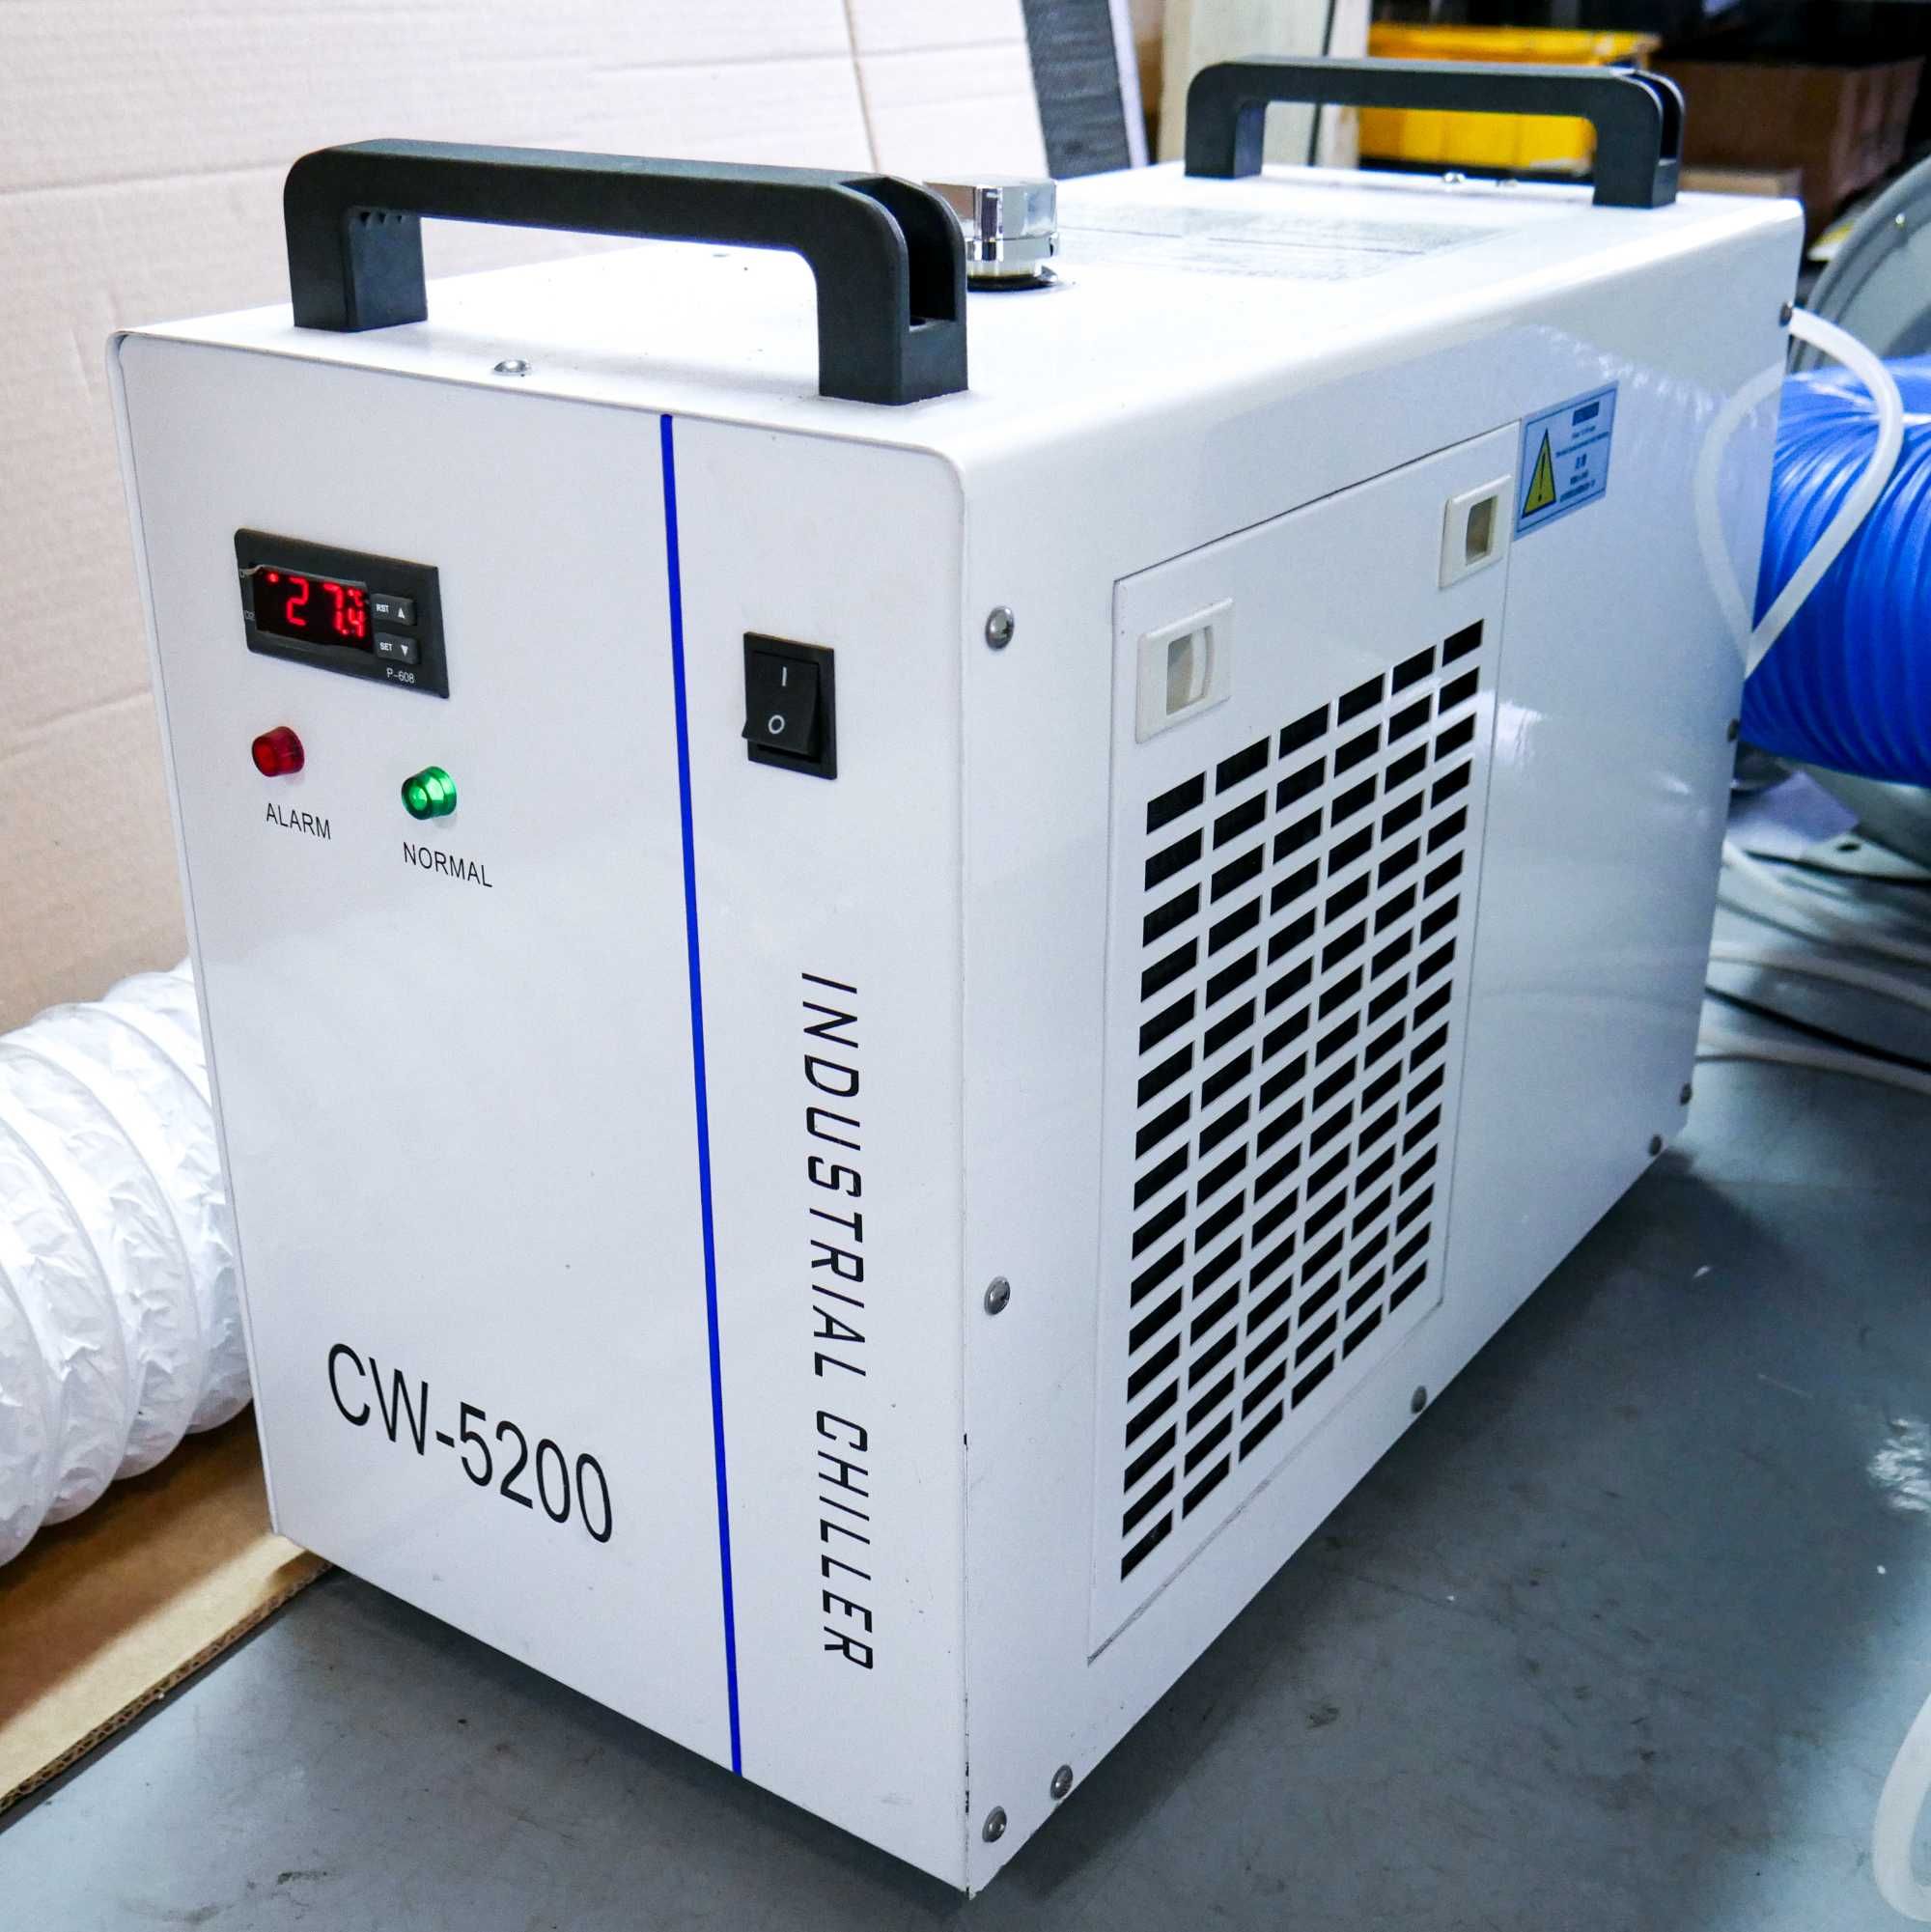 Chłodnica do lasera CO2 - CW5200 - chiller Weni Solution